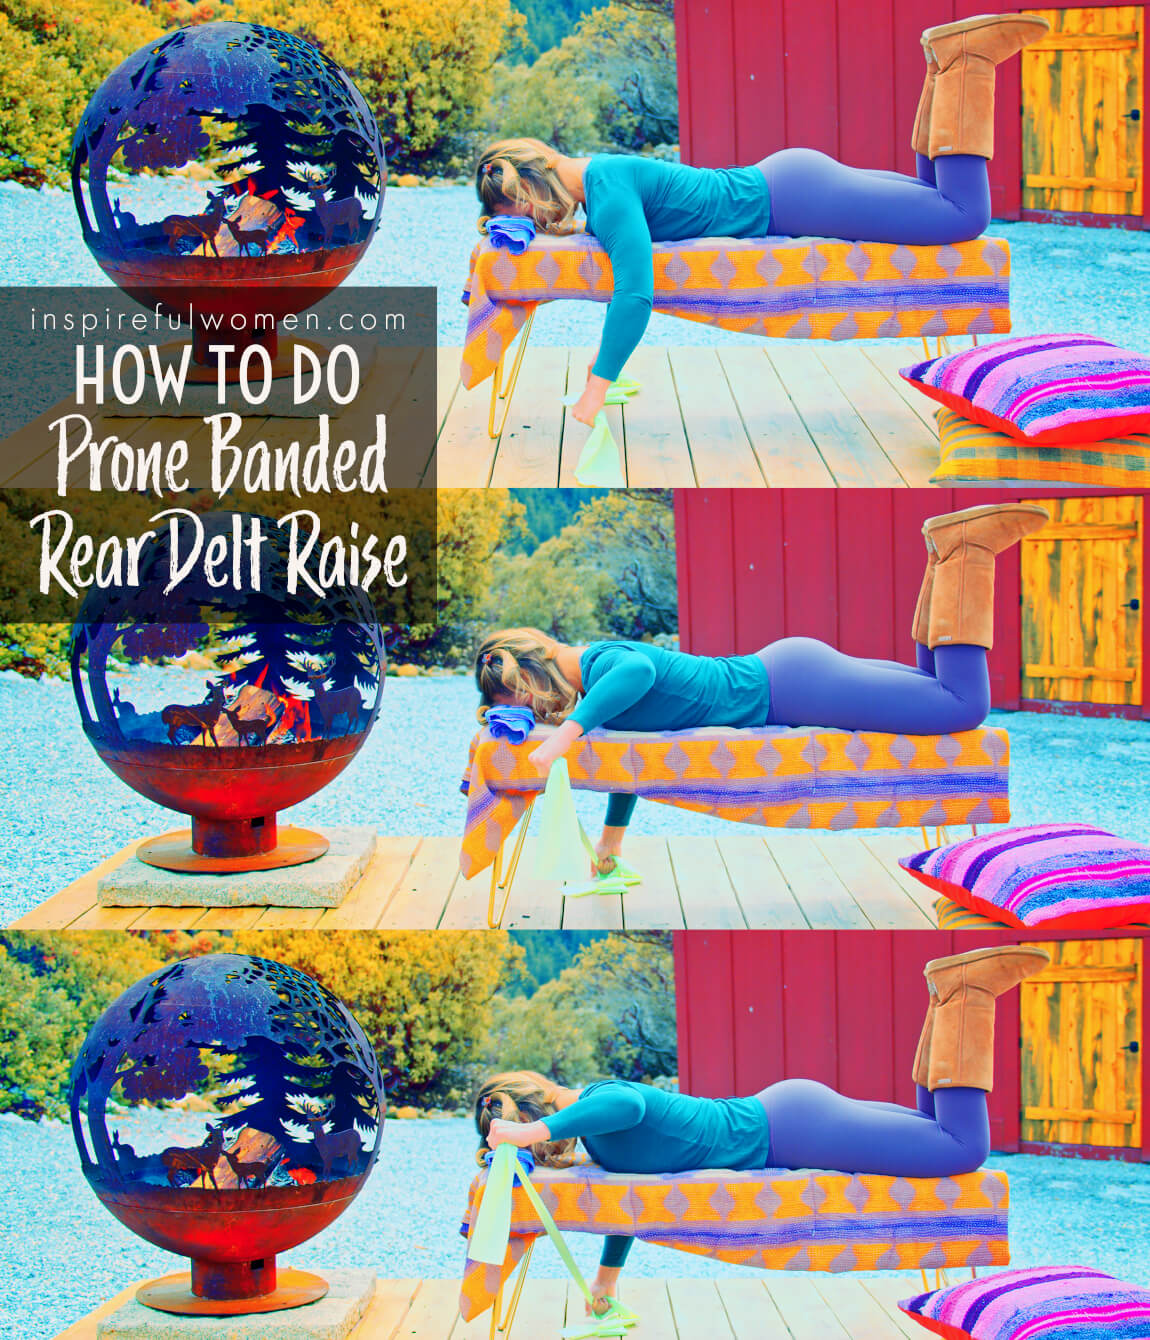 how-to-do-prone-banded-rear-delt-raise-shoulder-resistance-exercise-at-home-women-40-plus